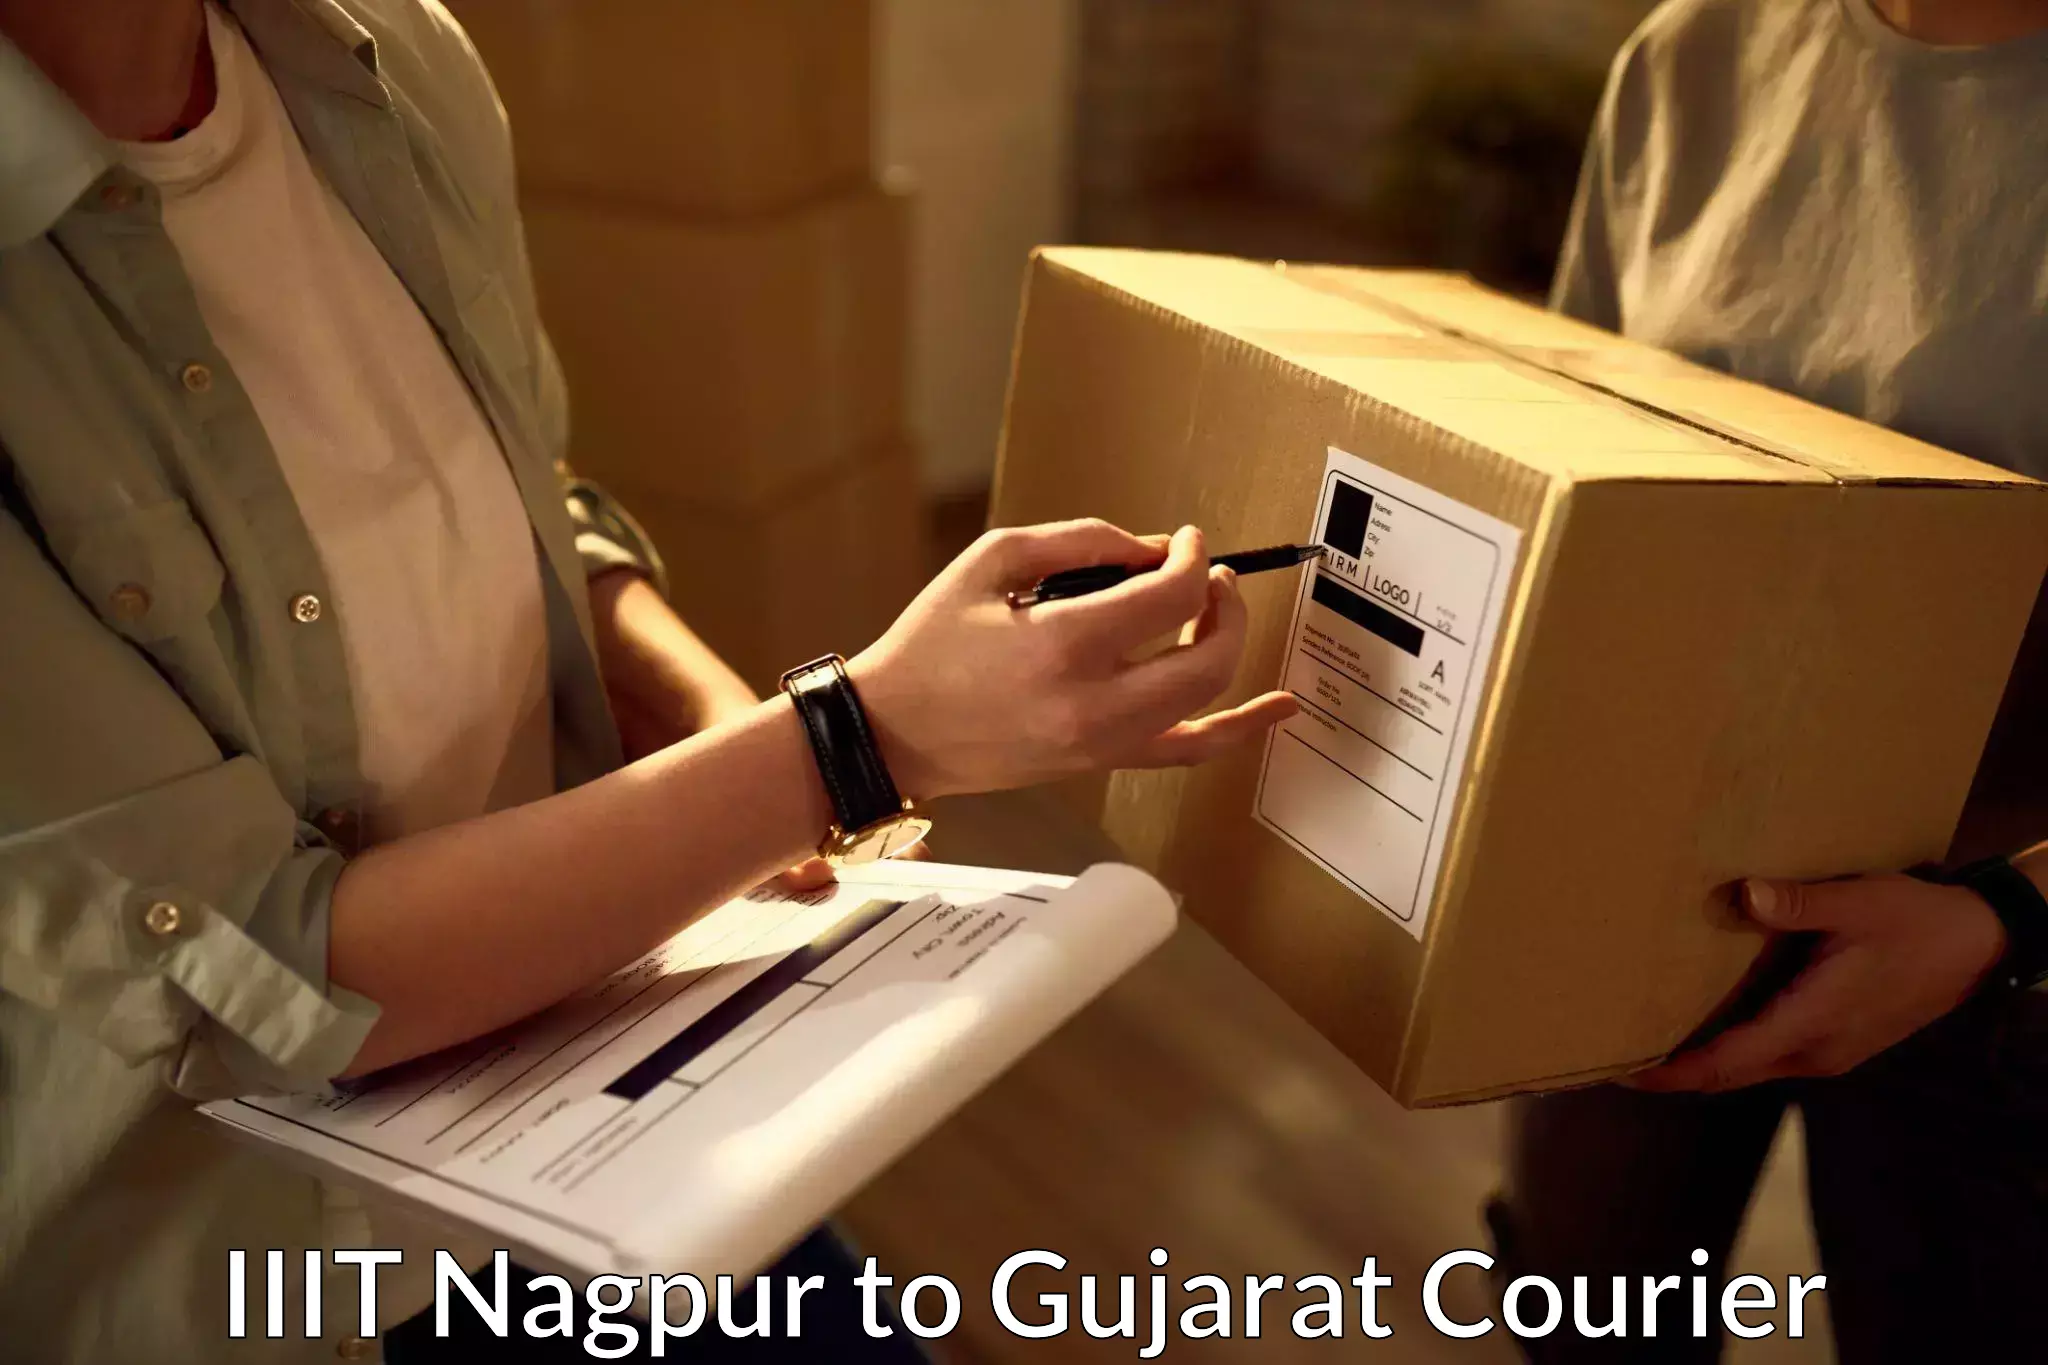 Courier service comparison IIIT Nagpur to Songadh